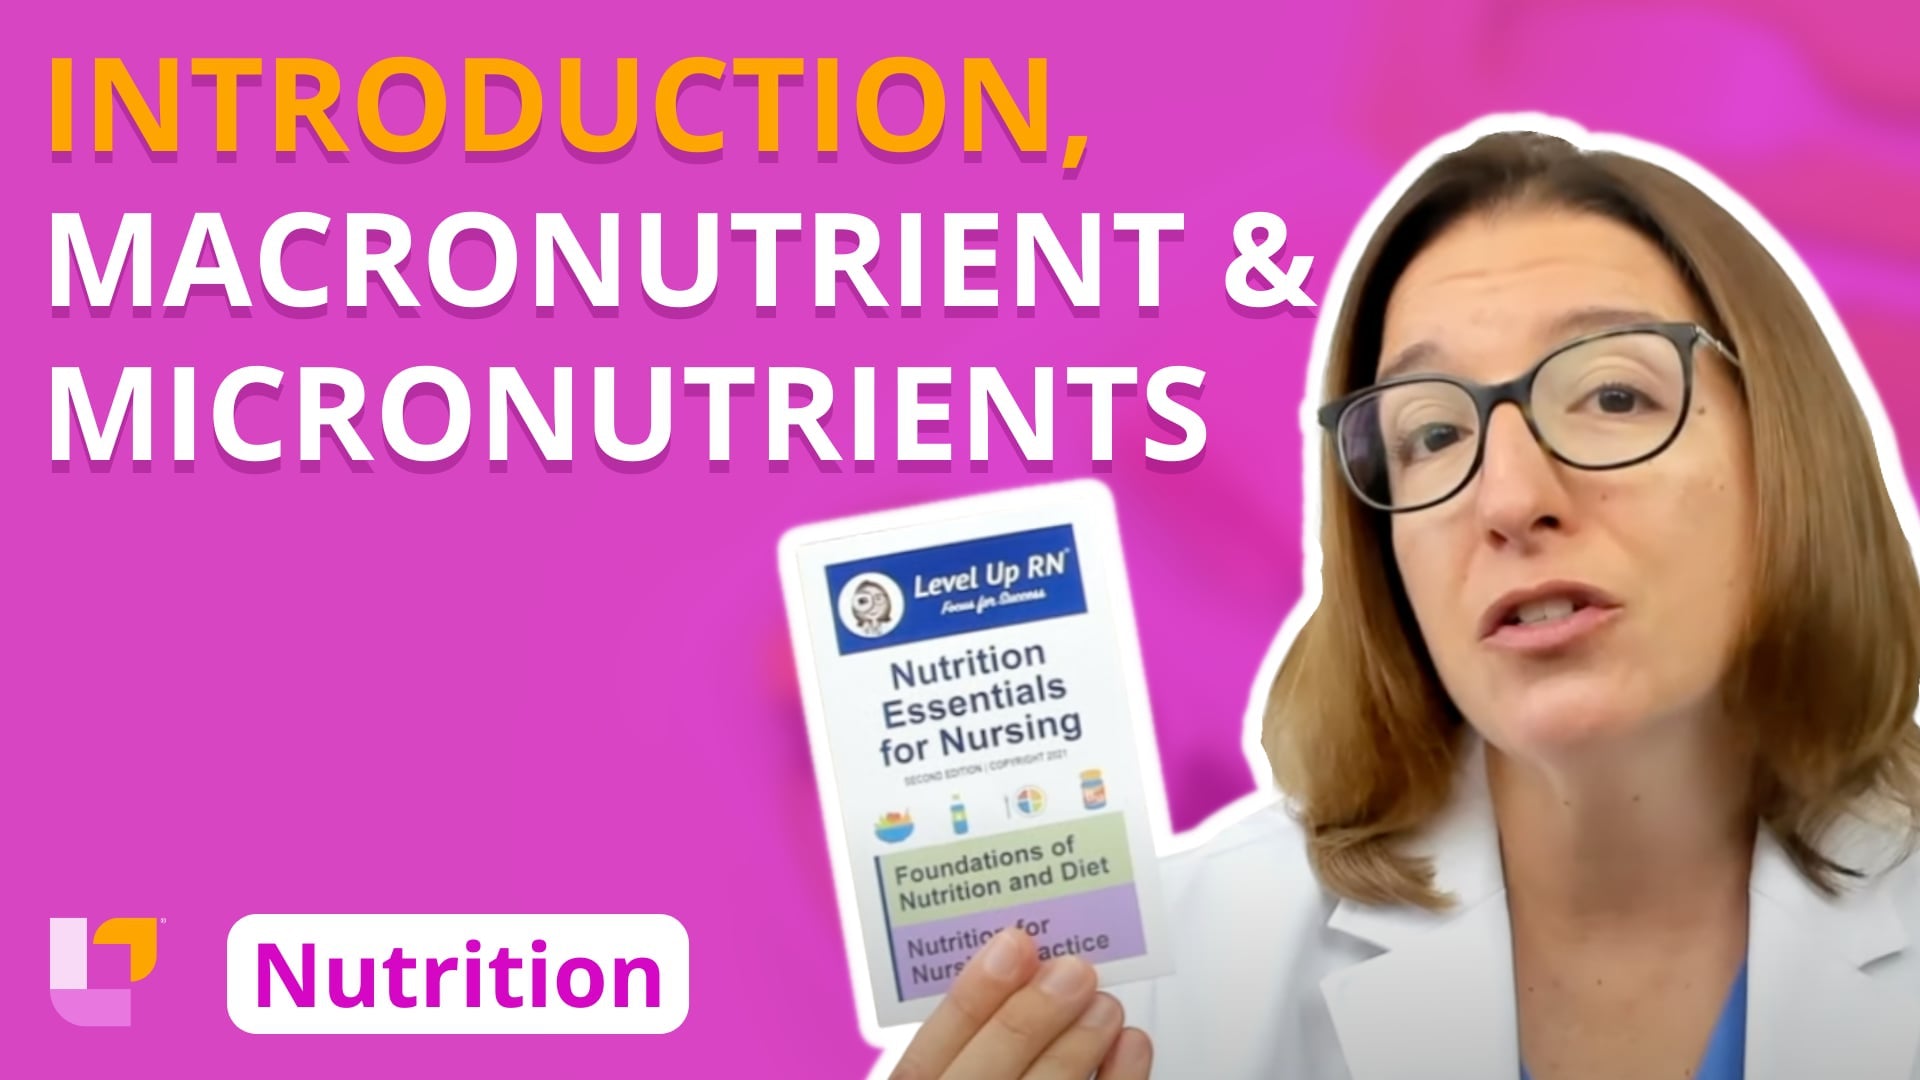 Nutrition, part 1: Introduction, Overview of Nutrients - LevelUpRN